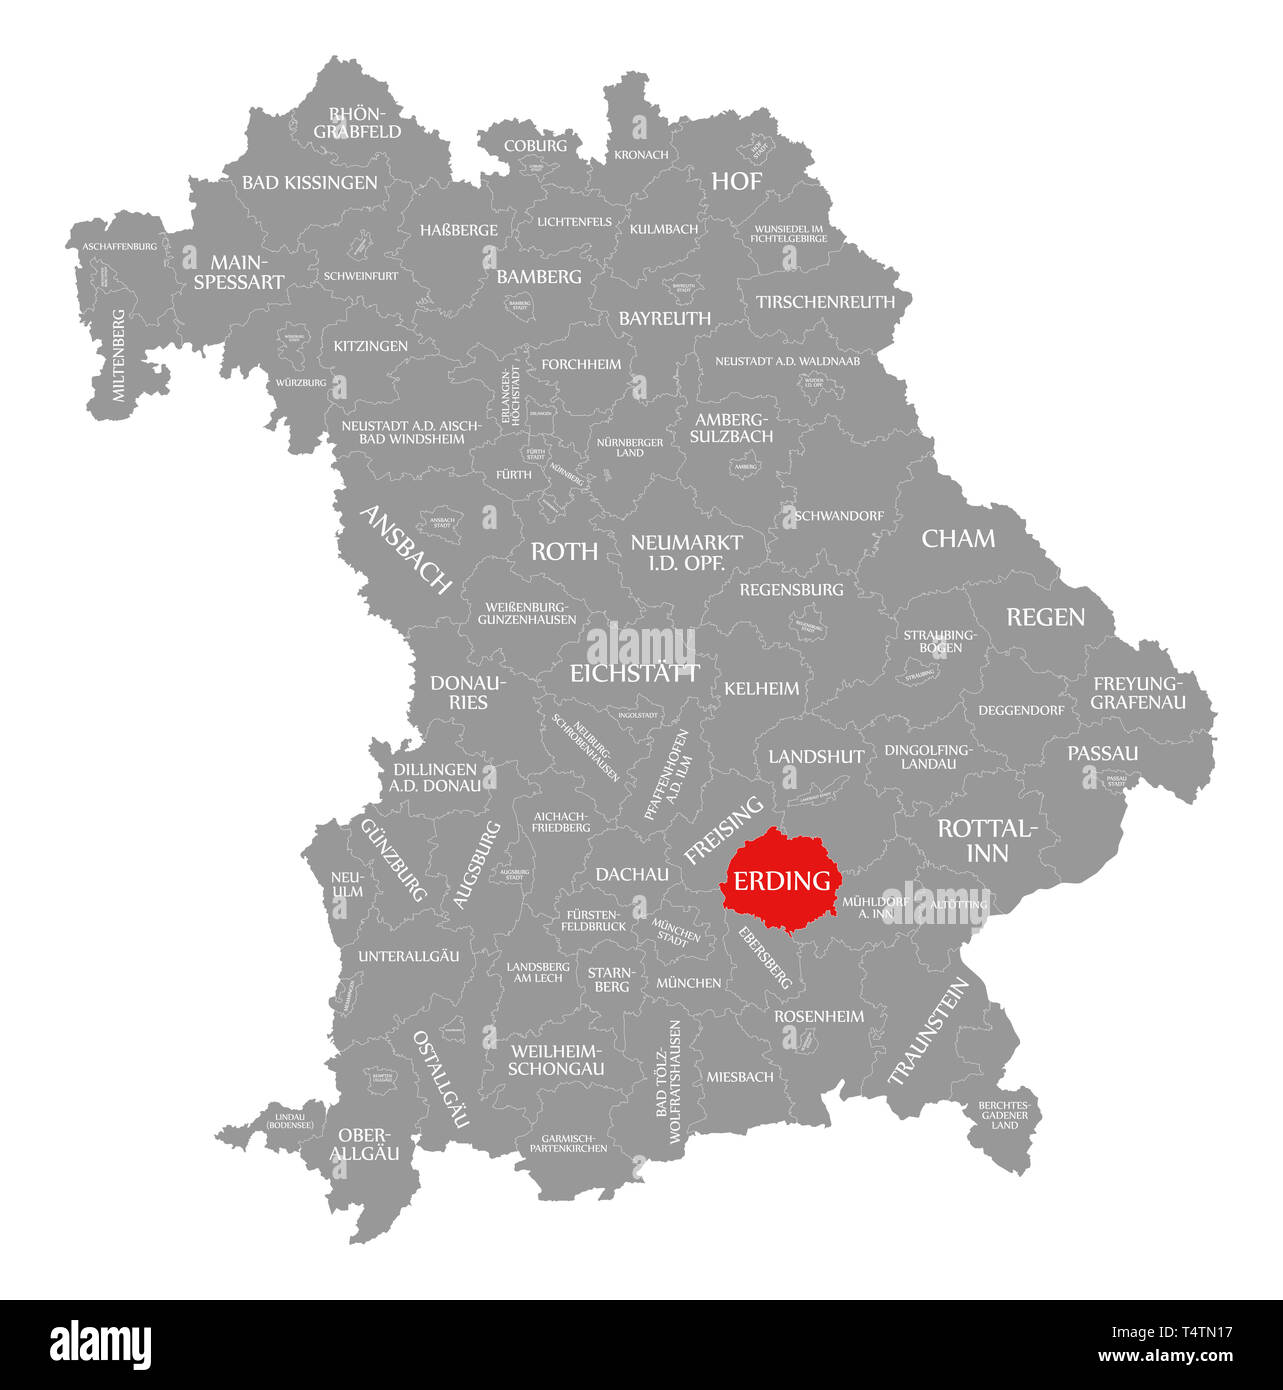 Erding county red highlighted in map of Bavaria Germany Stock Photo